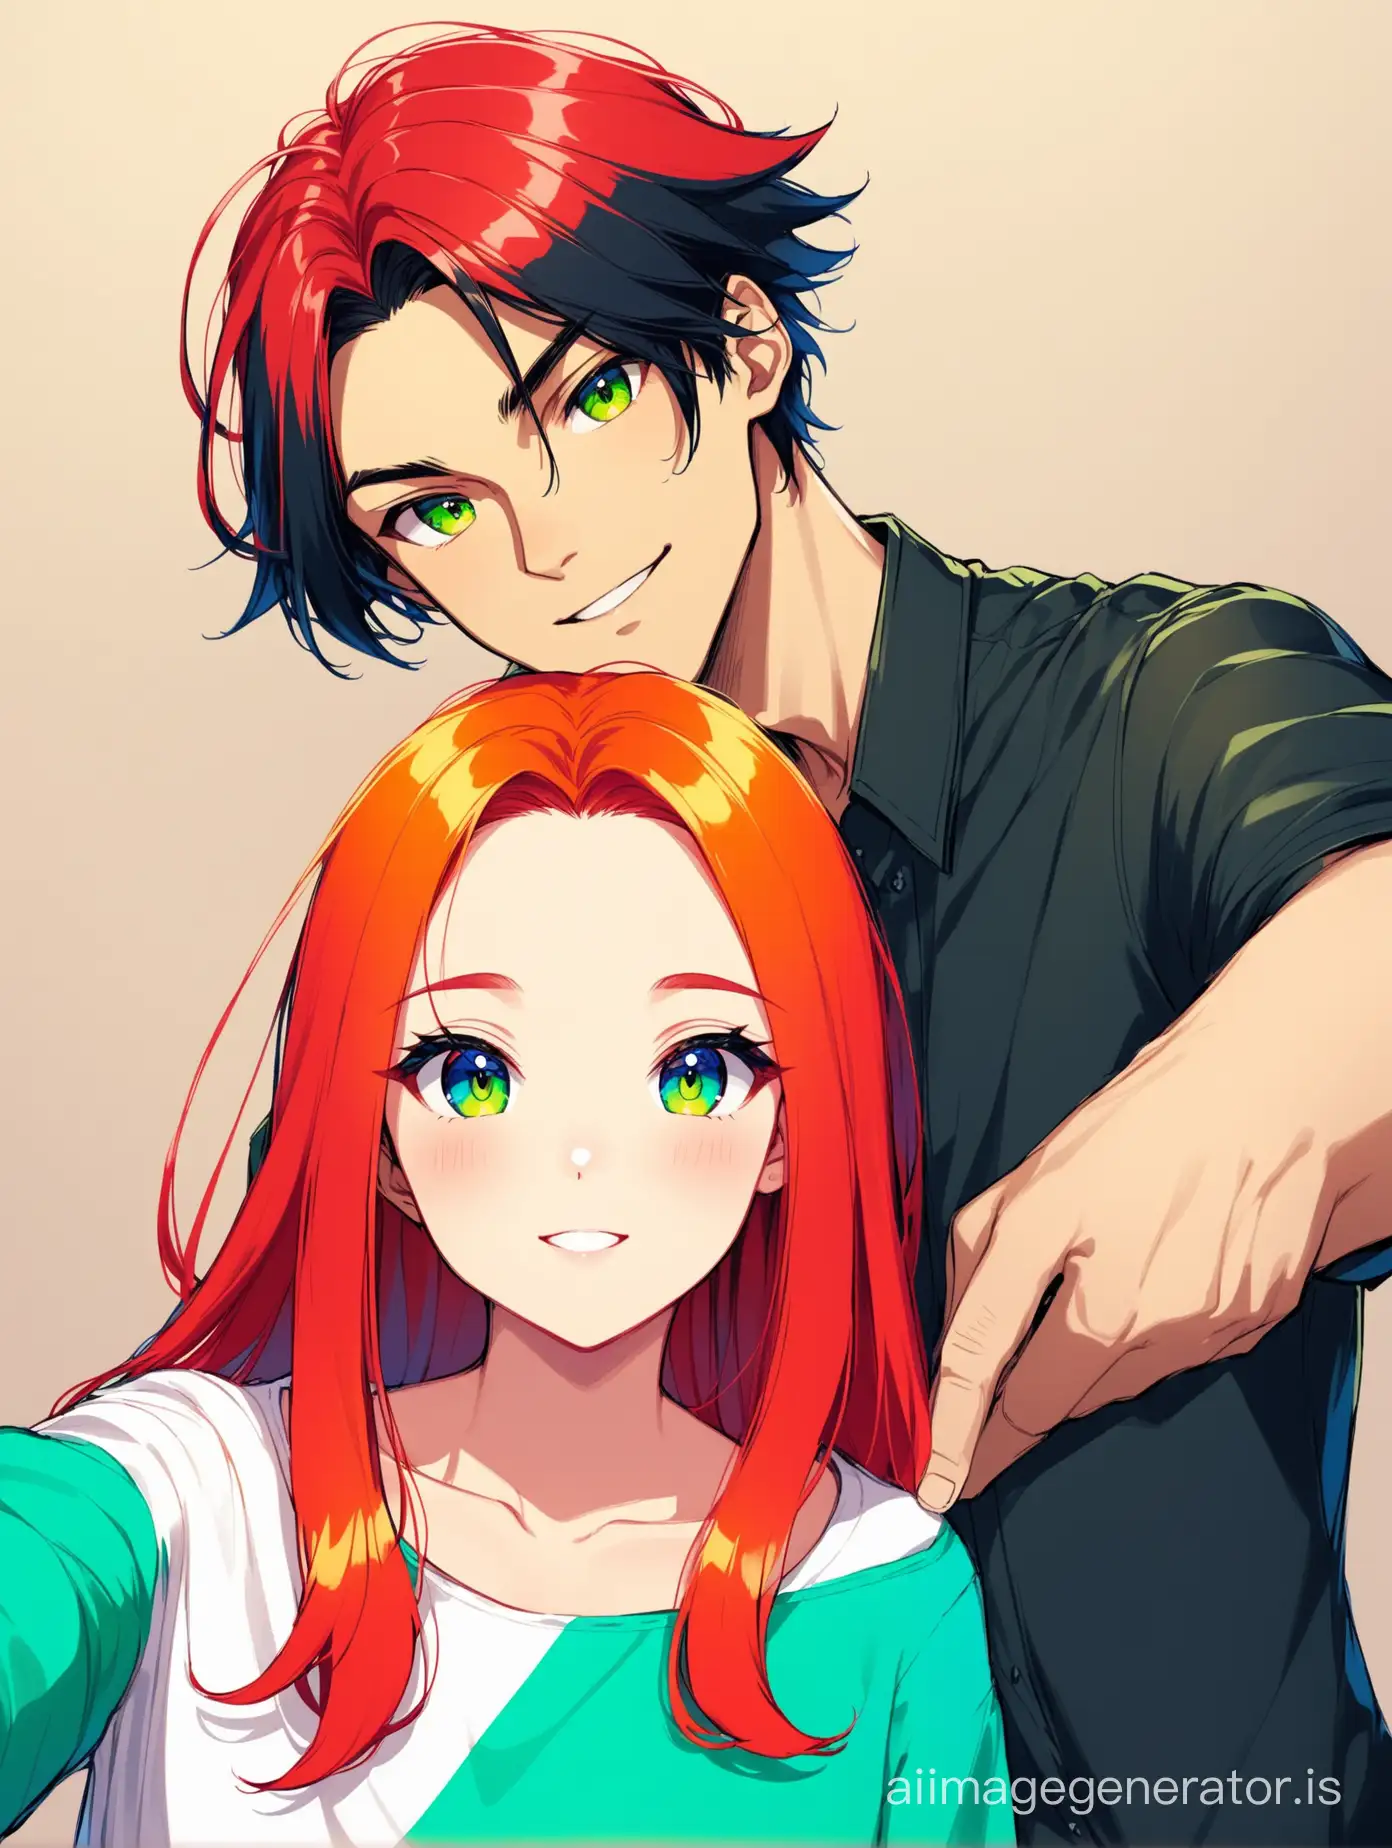 Selfie girl with bright red hair dressed in clothes of yellow, blue, and green colors, with a guy with black hair who is taller than her dressed in clothes of white, blue, red colors